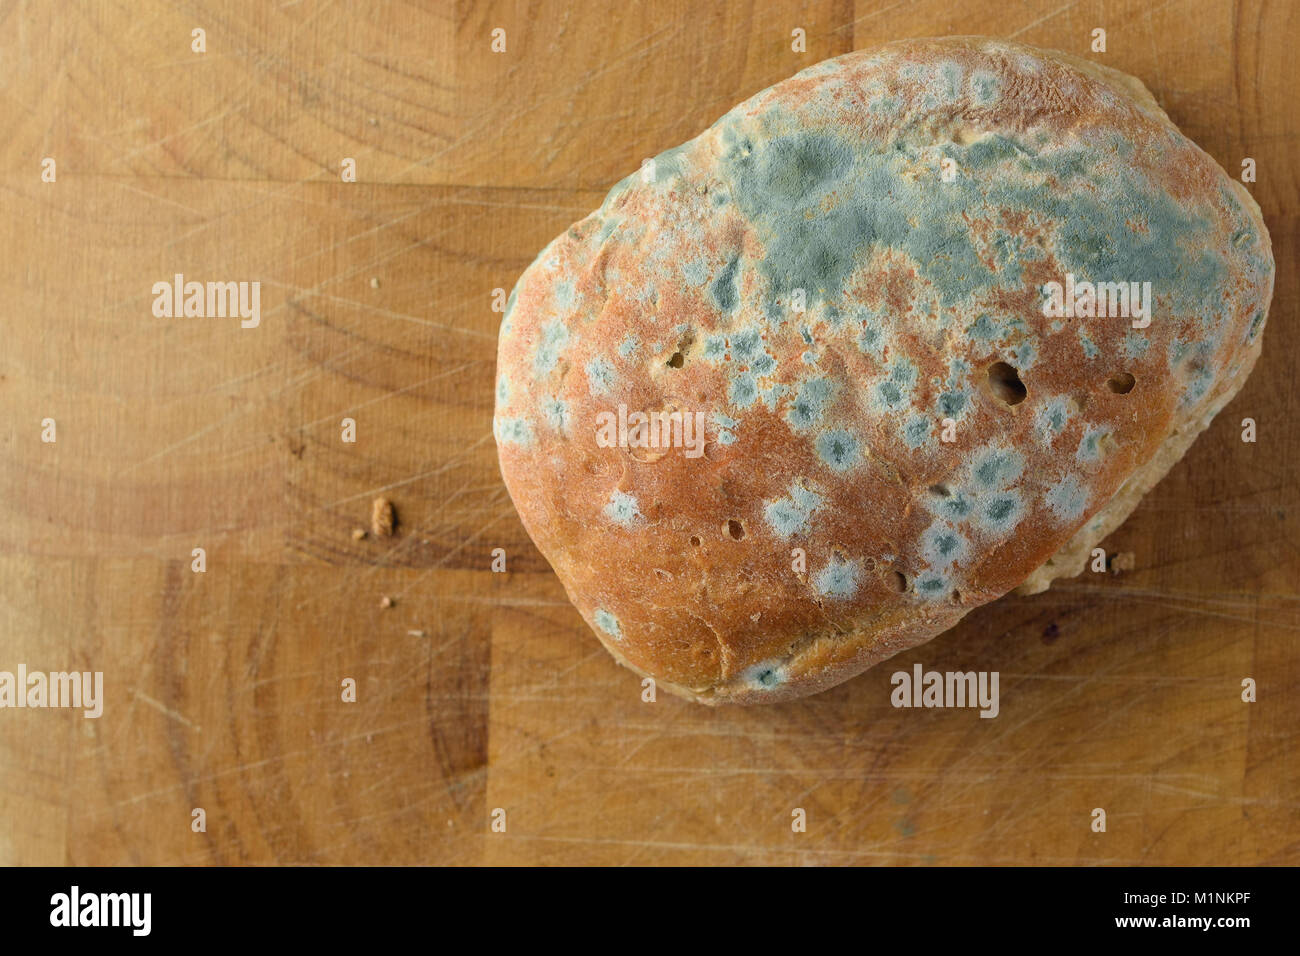 Moldy bread on wooden surface. Top view with space for text. Stock Photo